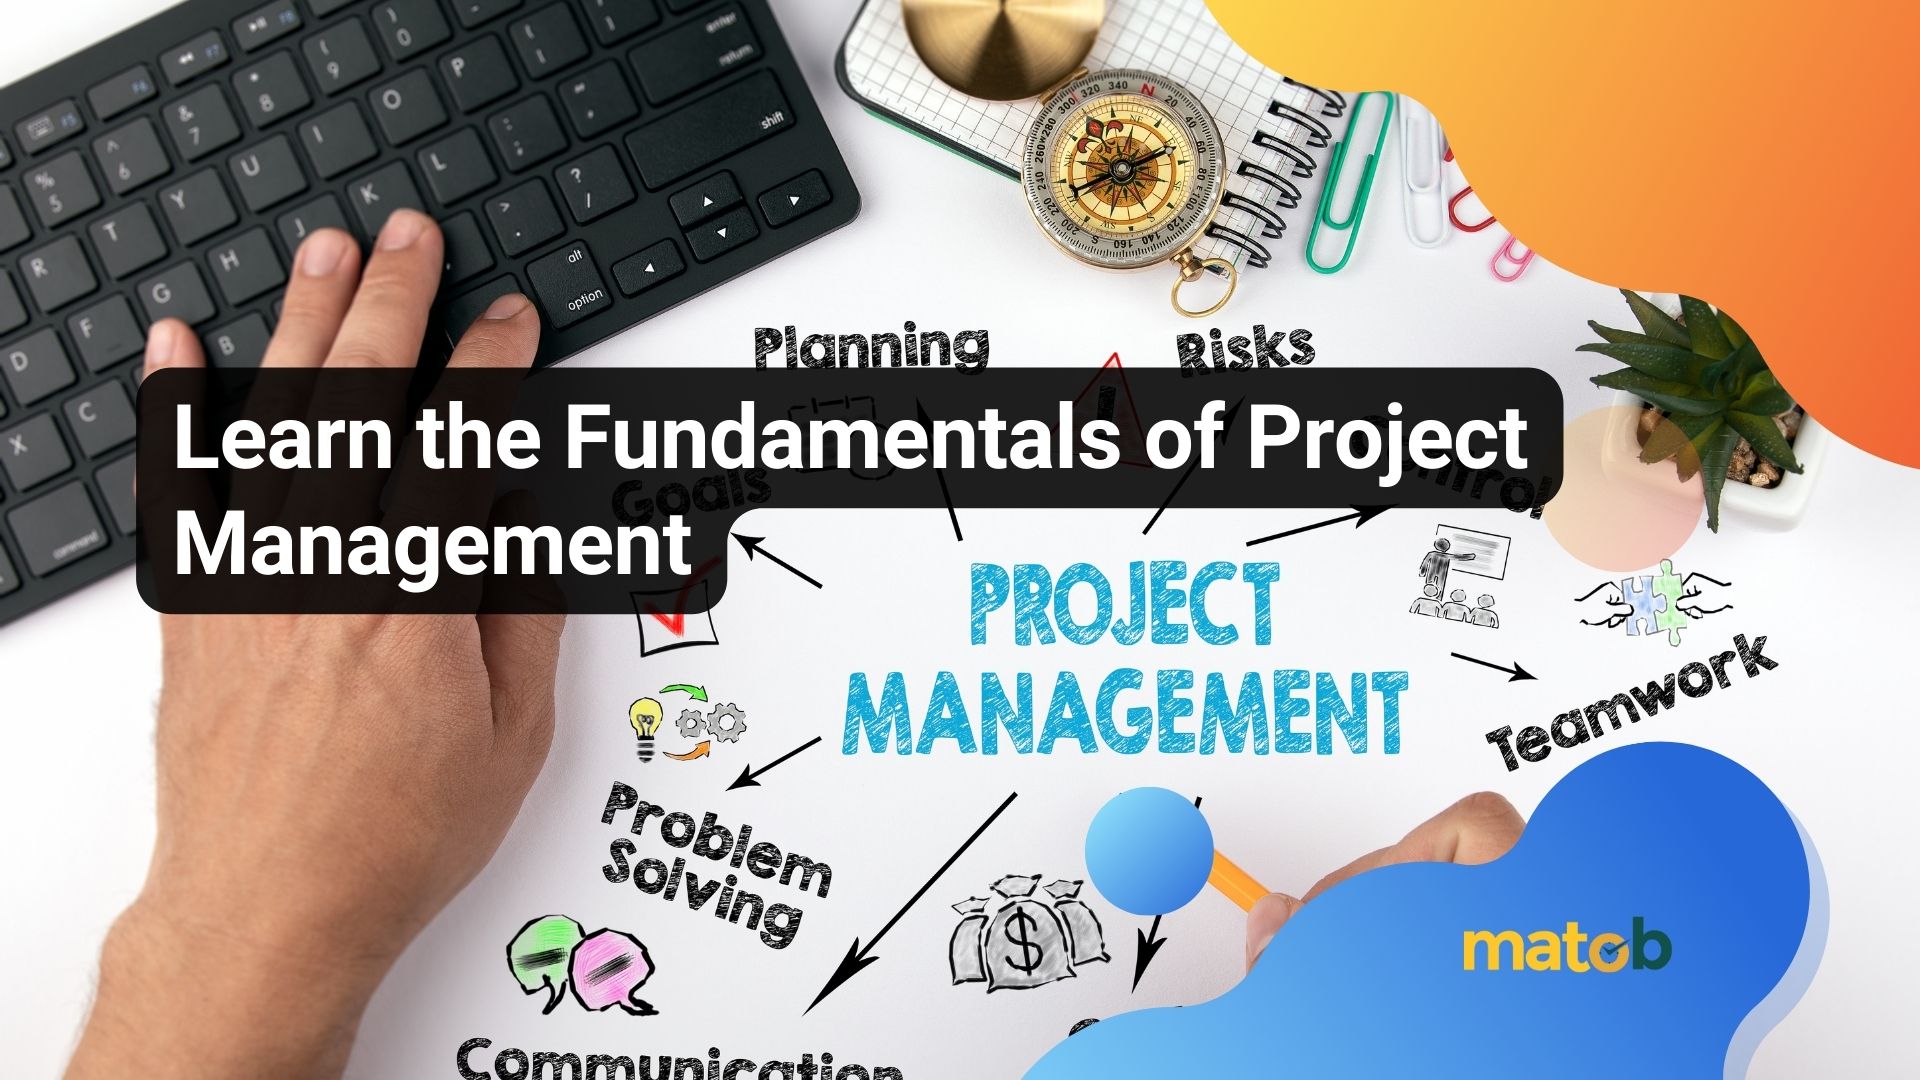 Learn the Fundamentals of Project Management